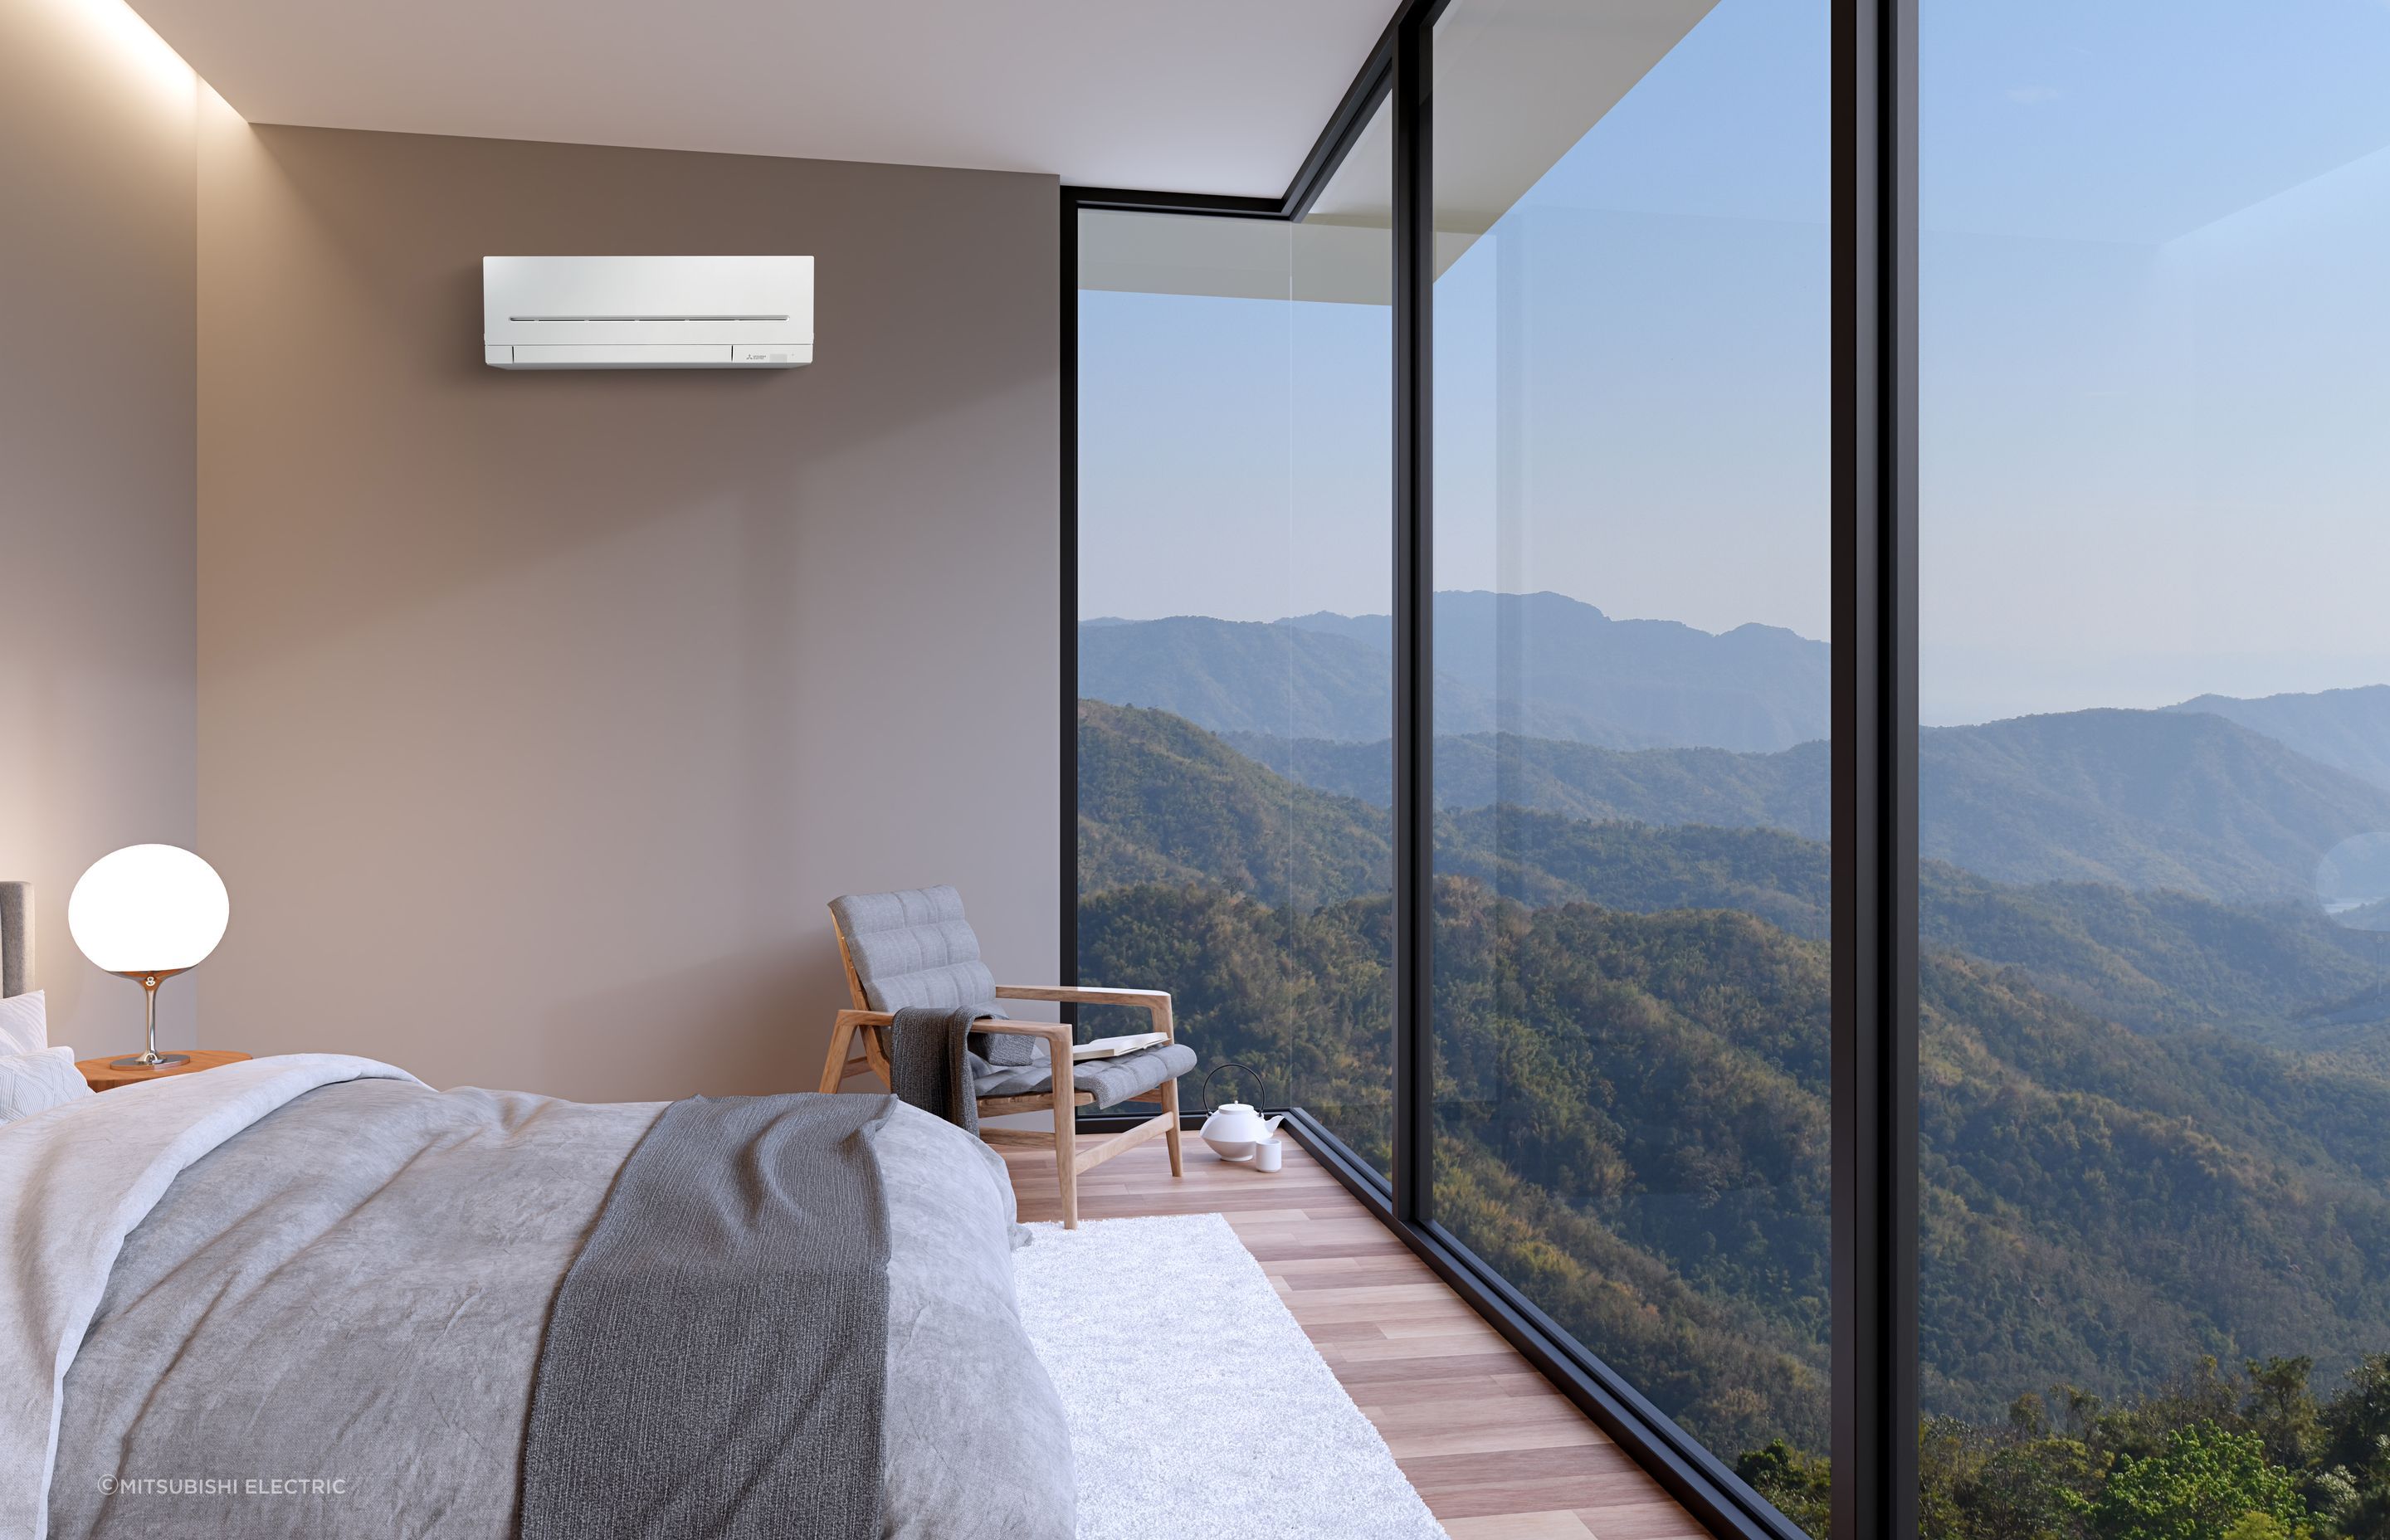 The AP Mini is the perfect solution for quiet, energy-efficient comfort in bedrooms, allowing occupants total control of their room’s temperature.